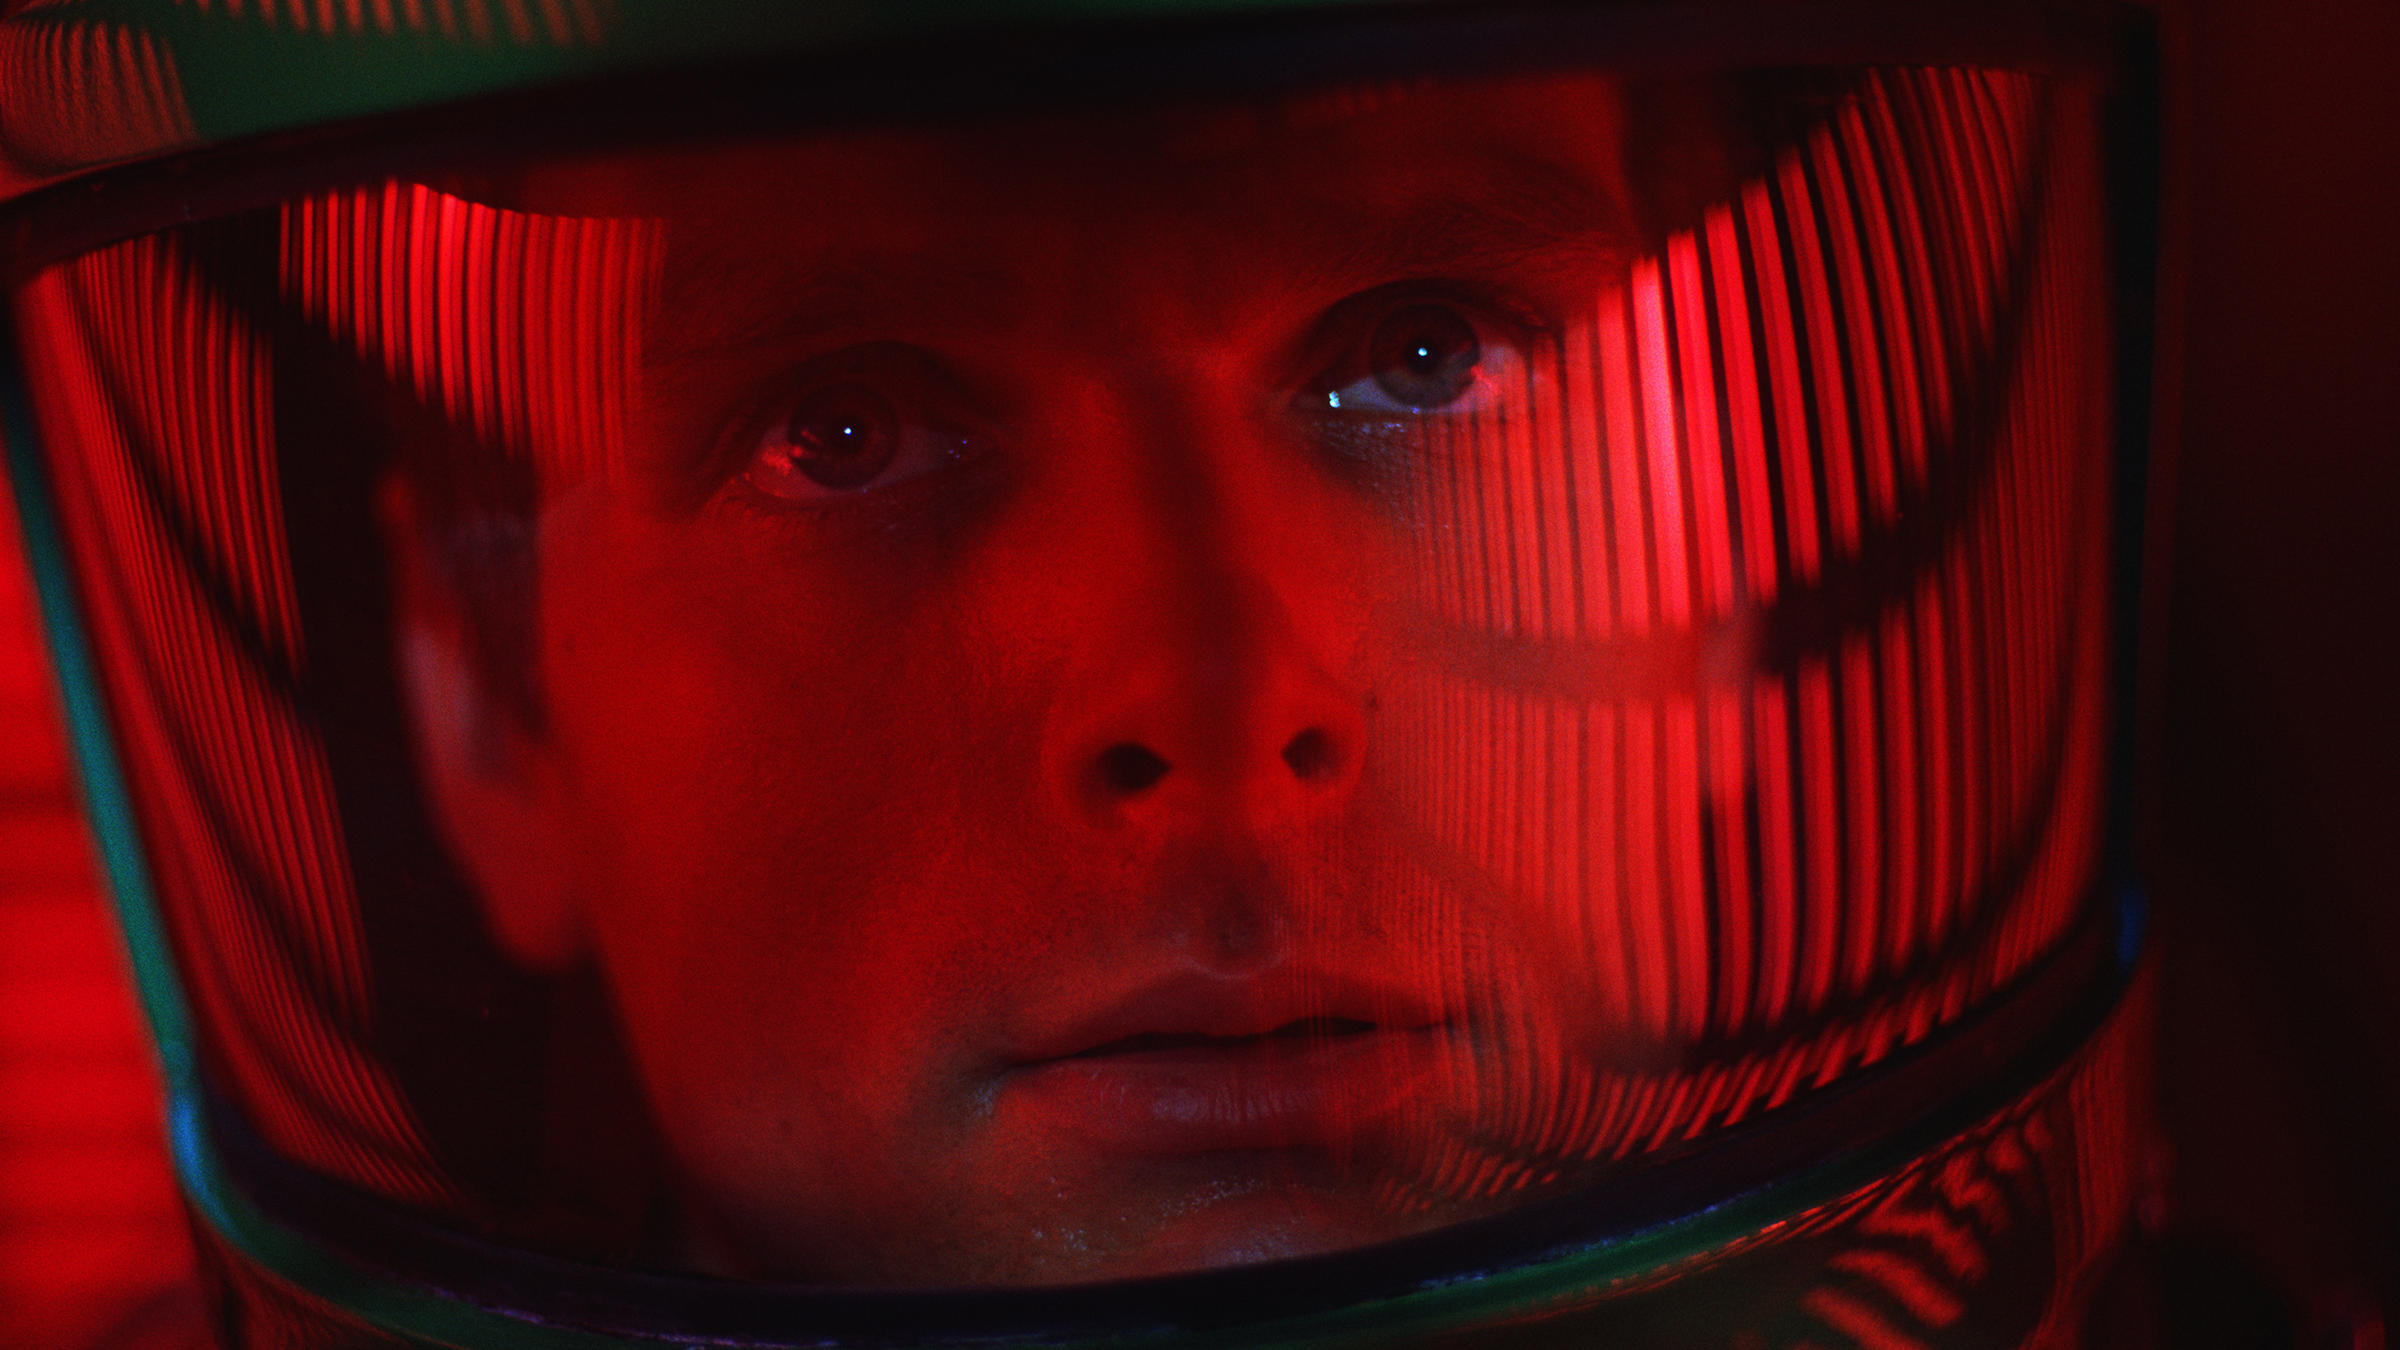 Close-up of a man's face through his space helmet, soaked in red light